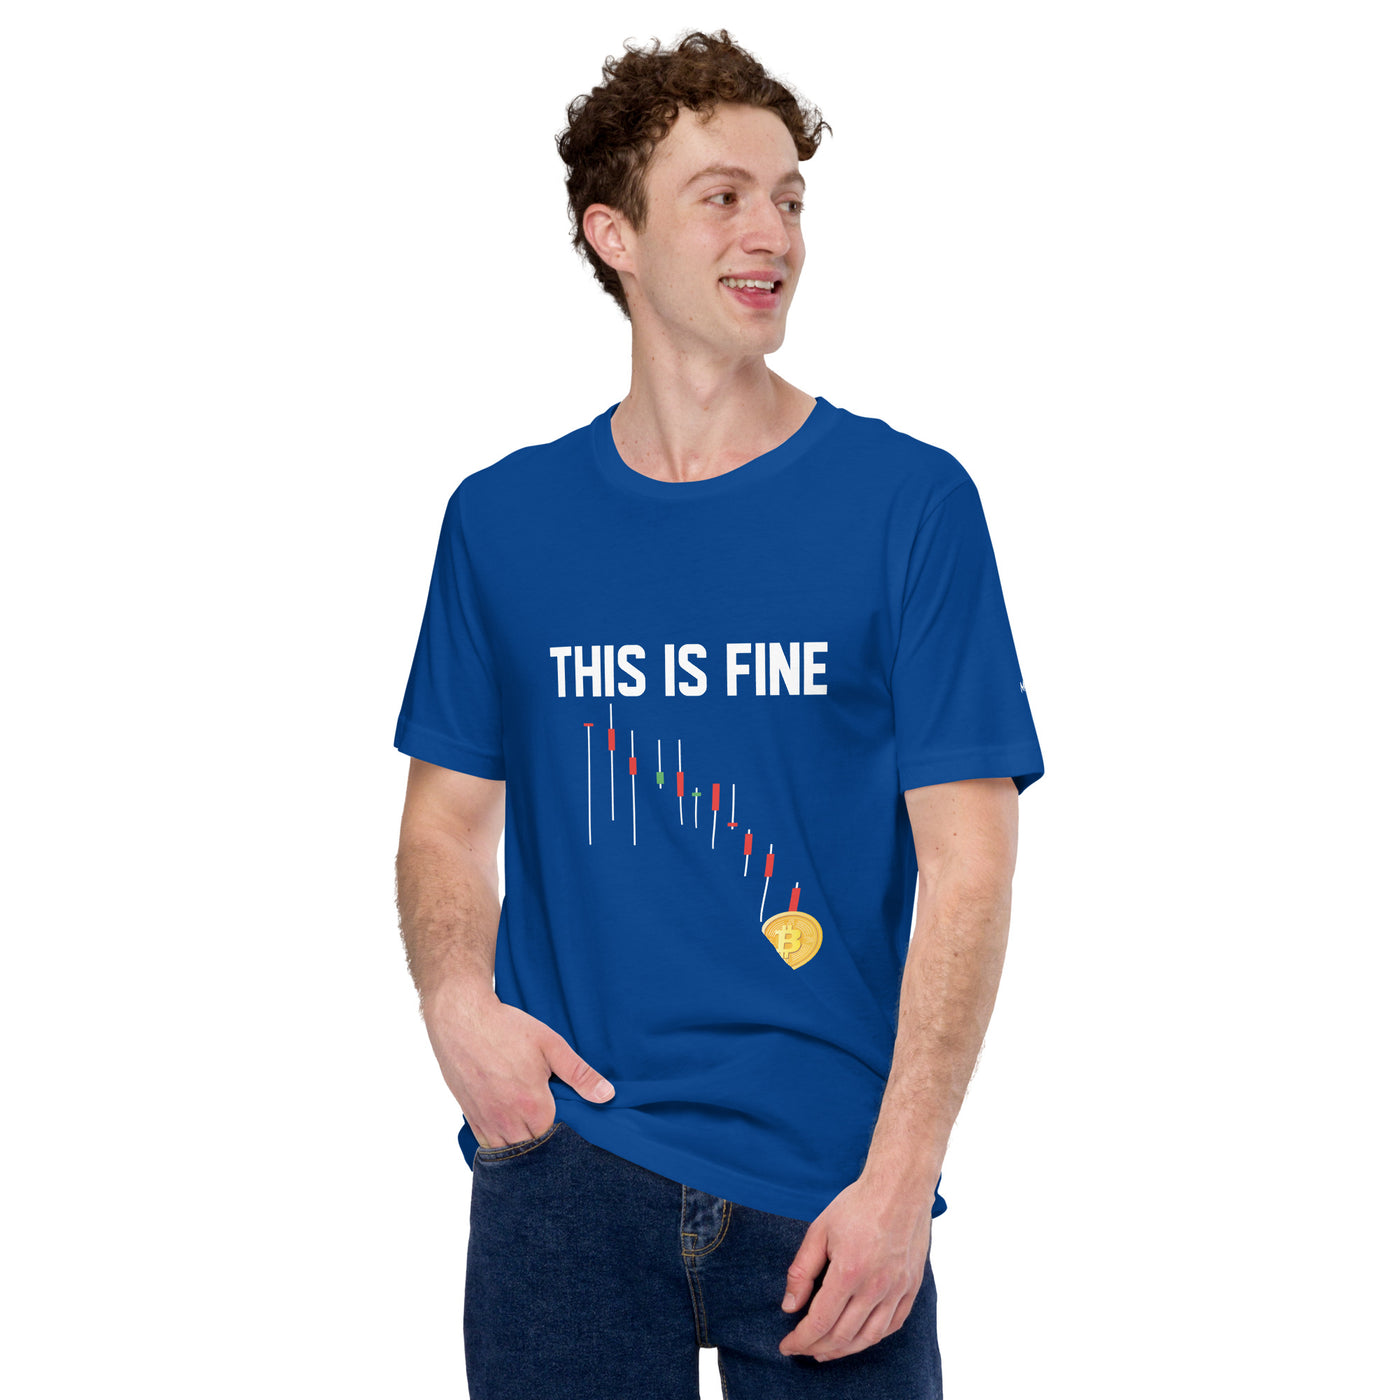 This is Fine - Unisex t-shirt